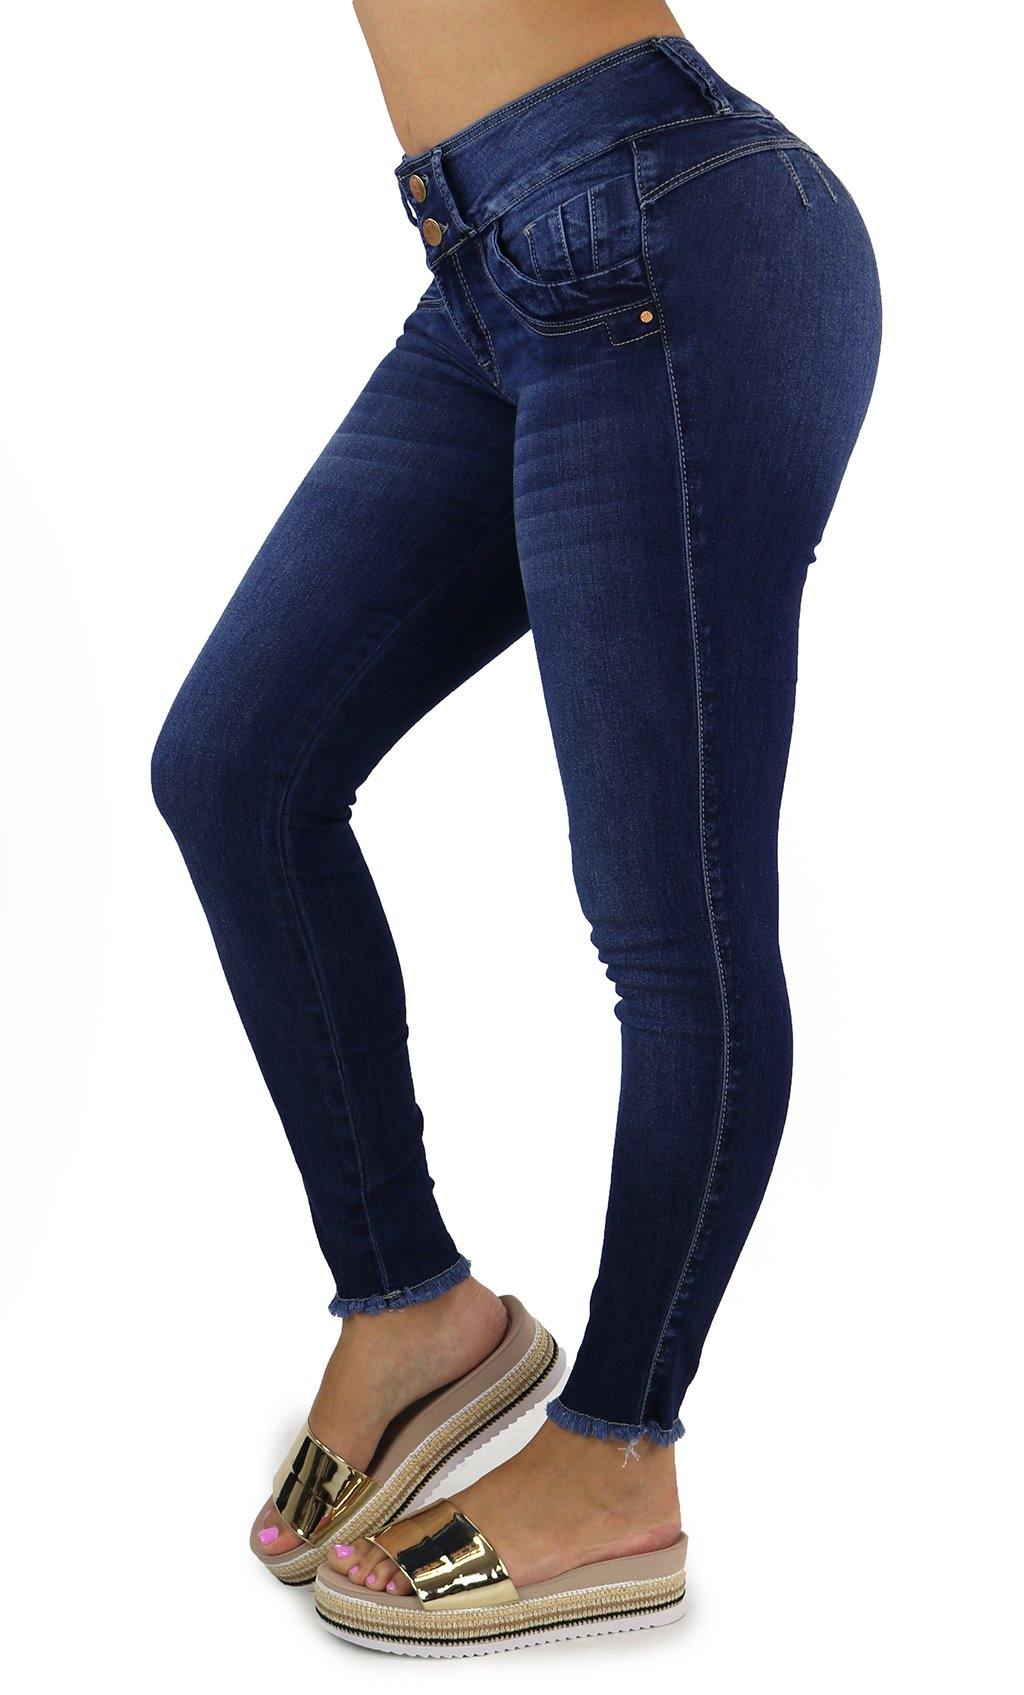 19070 Skinny Jeans Women Maripily Rivera – Pompis Stores